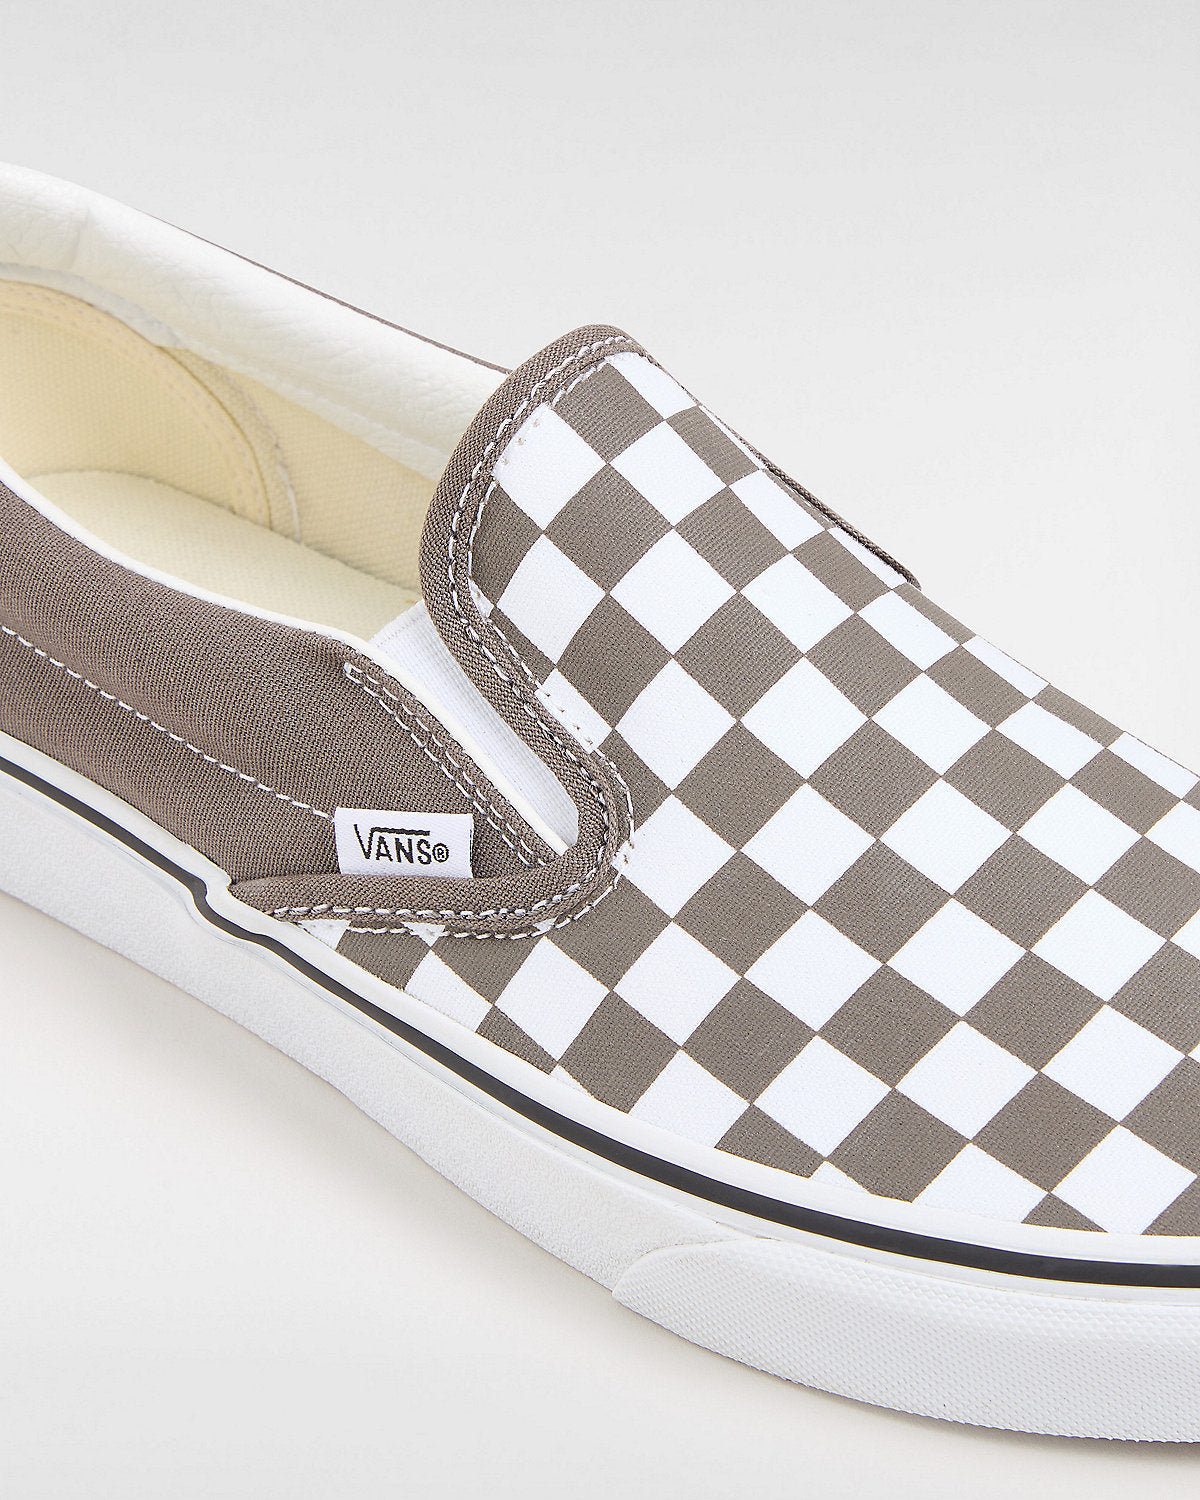 VANS Unisex Classic Slip-On Color Theory Checkerboard Trainers - Bungee Cord